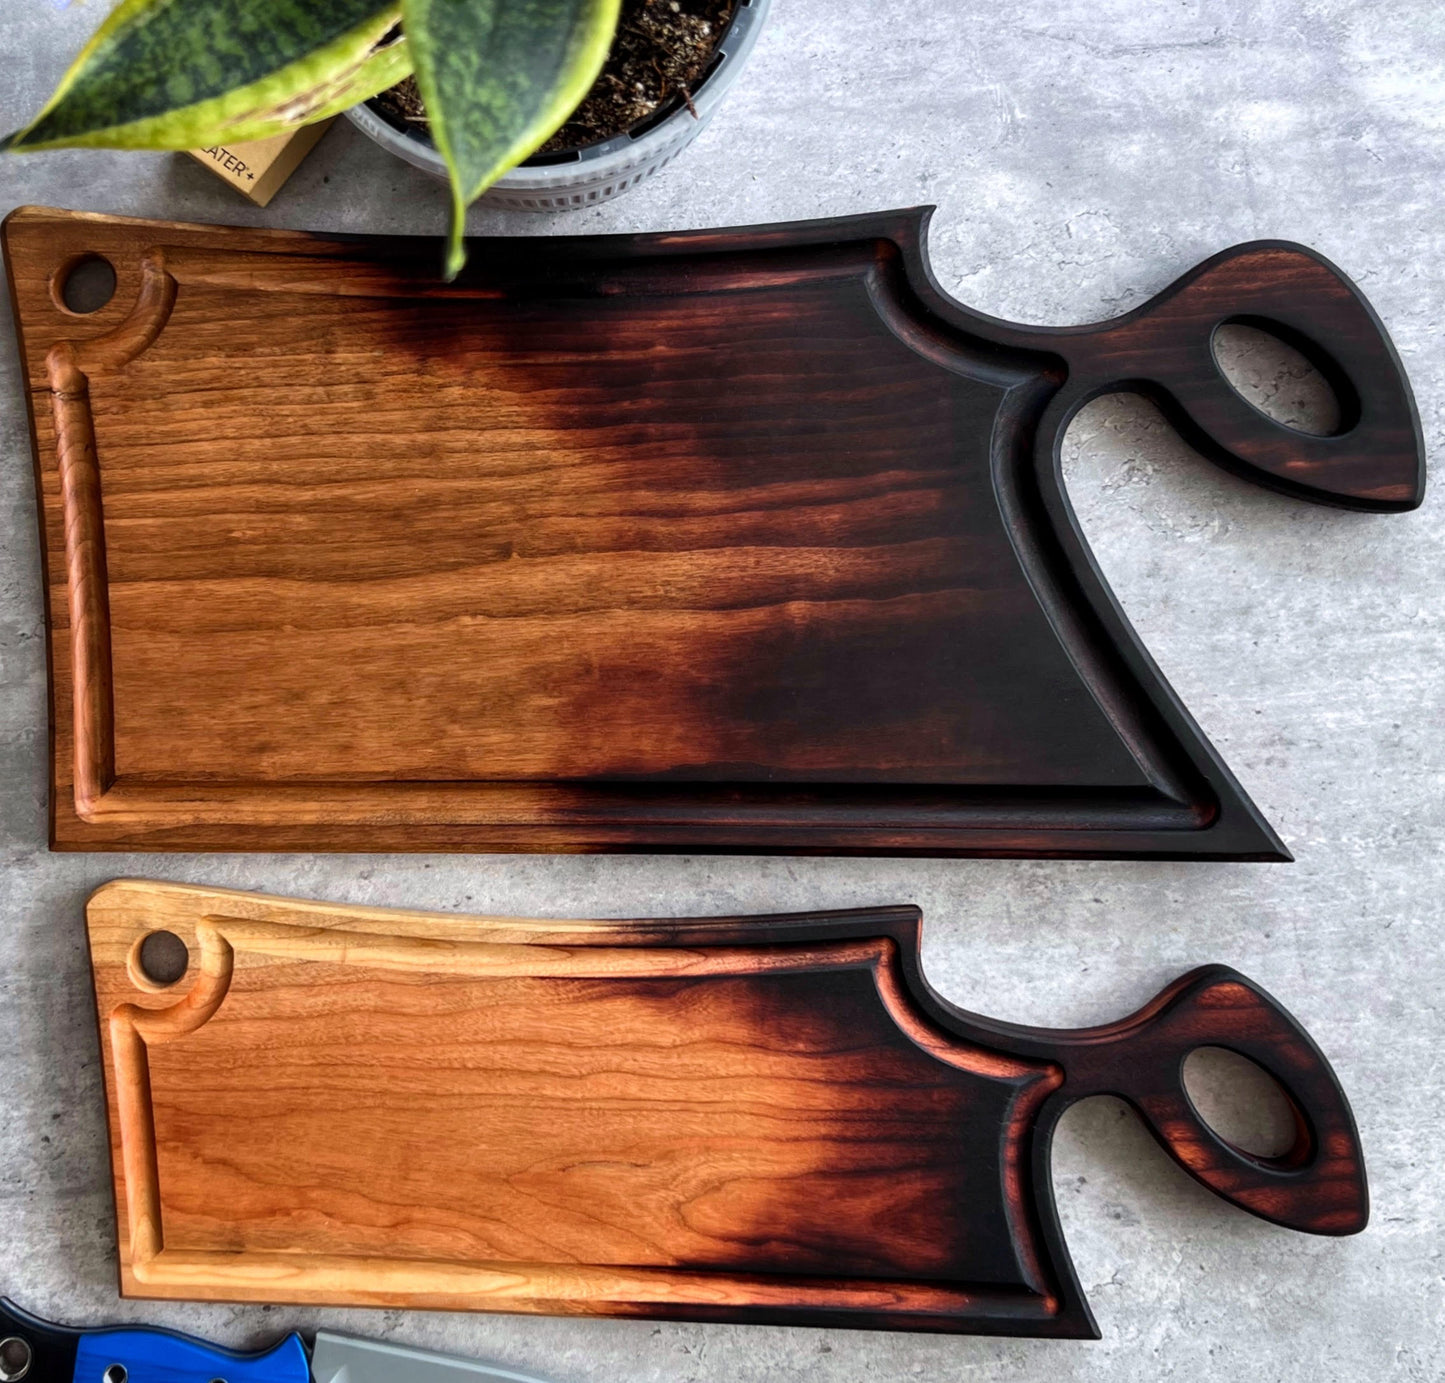 Cleaver Boards